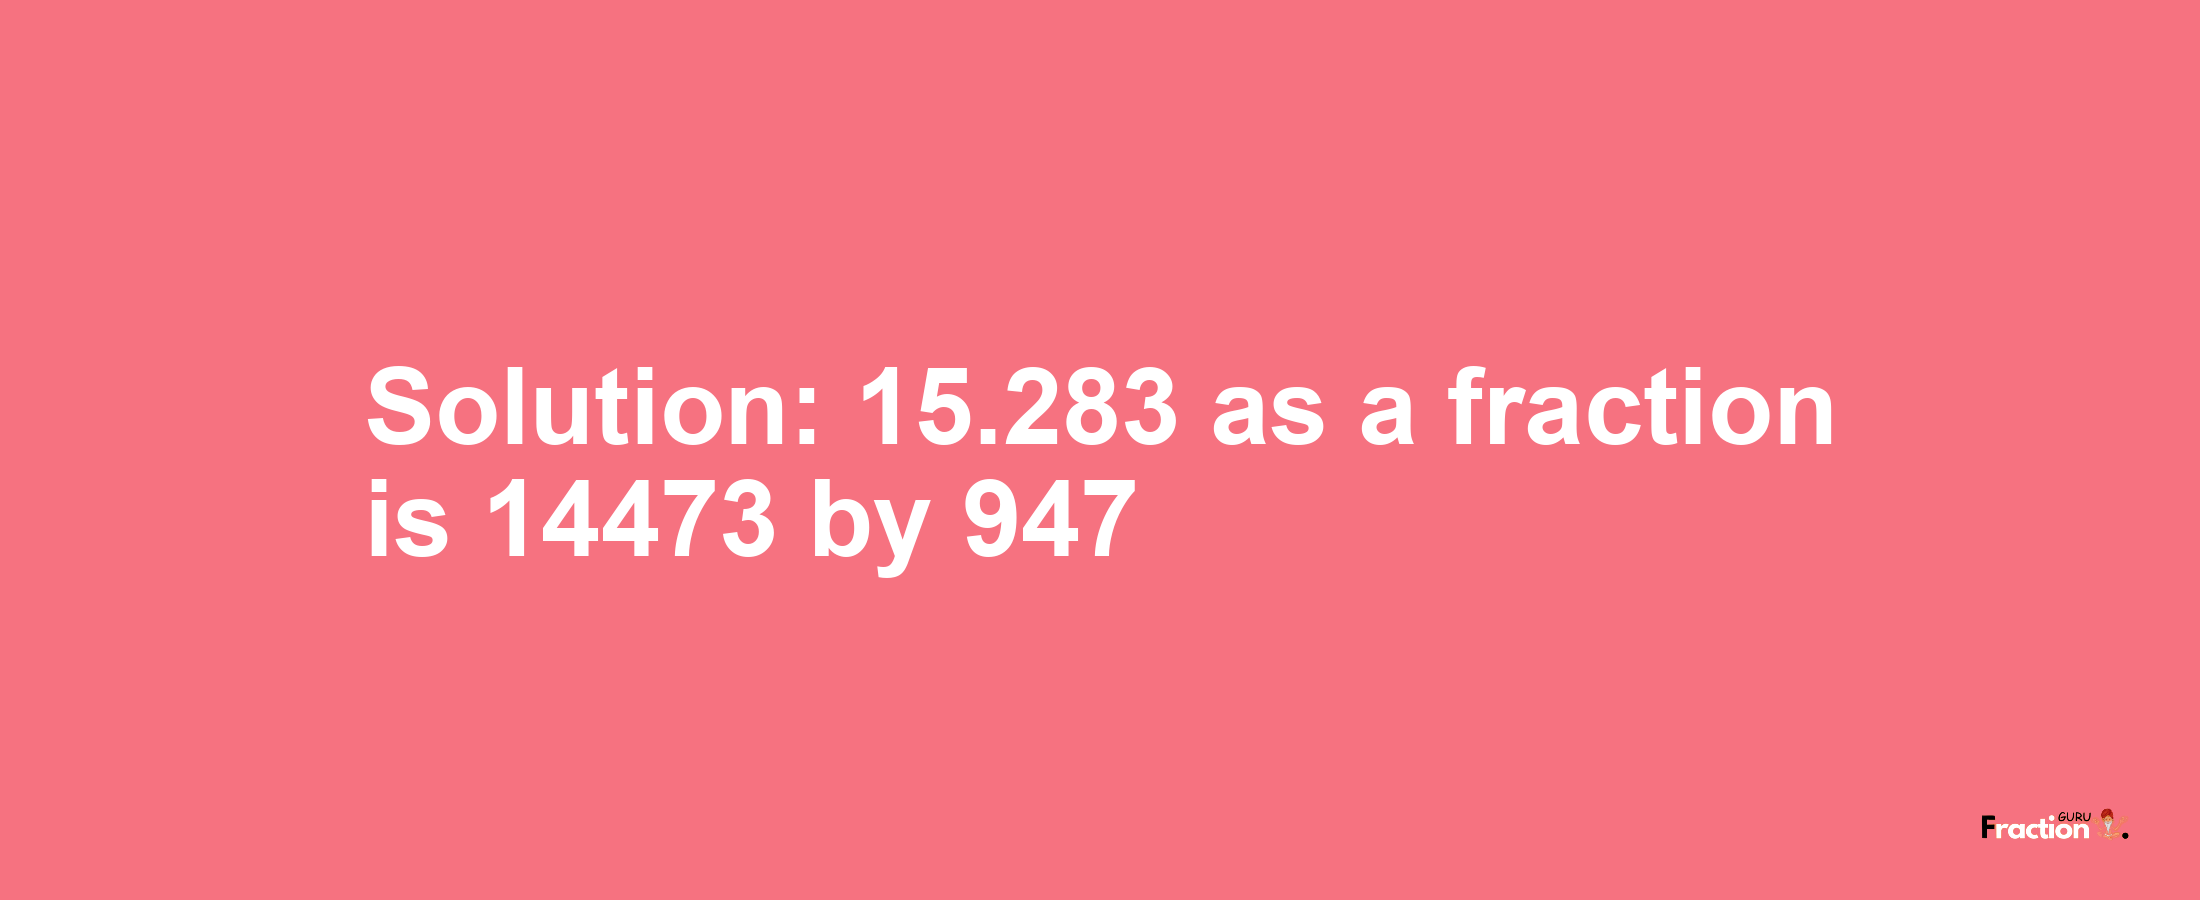 Solution:15.283 as a fraction is 14473/947